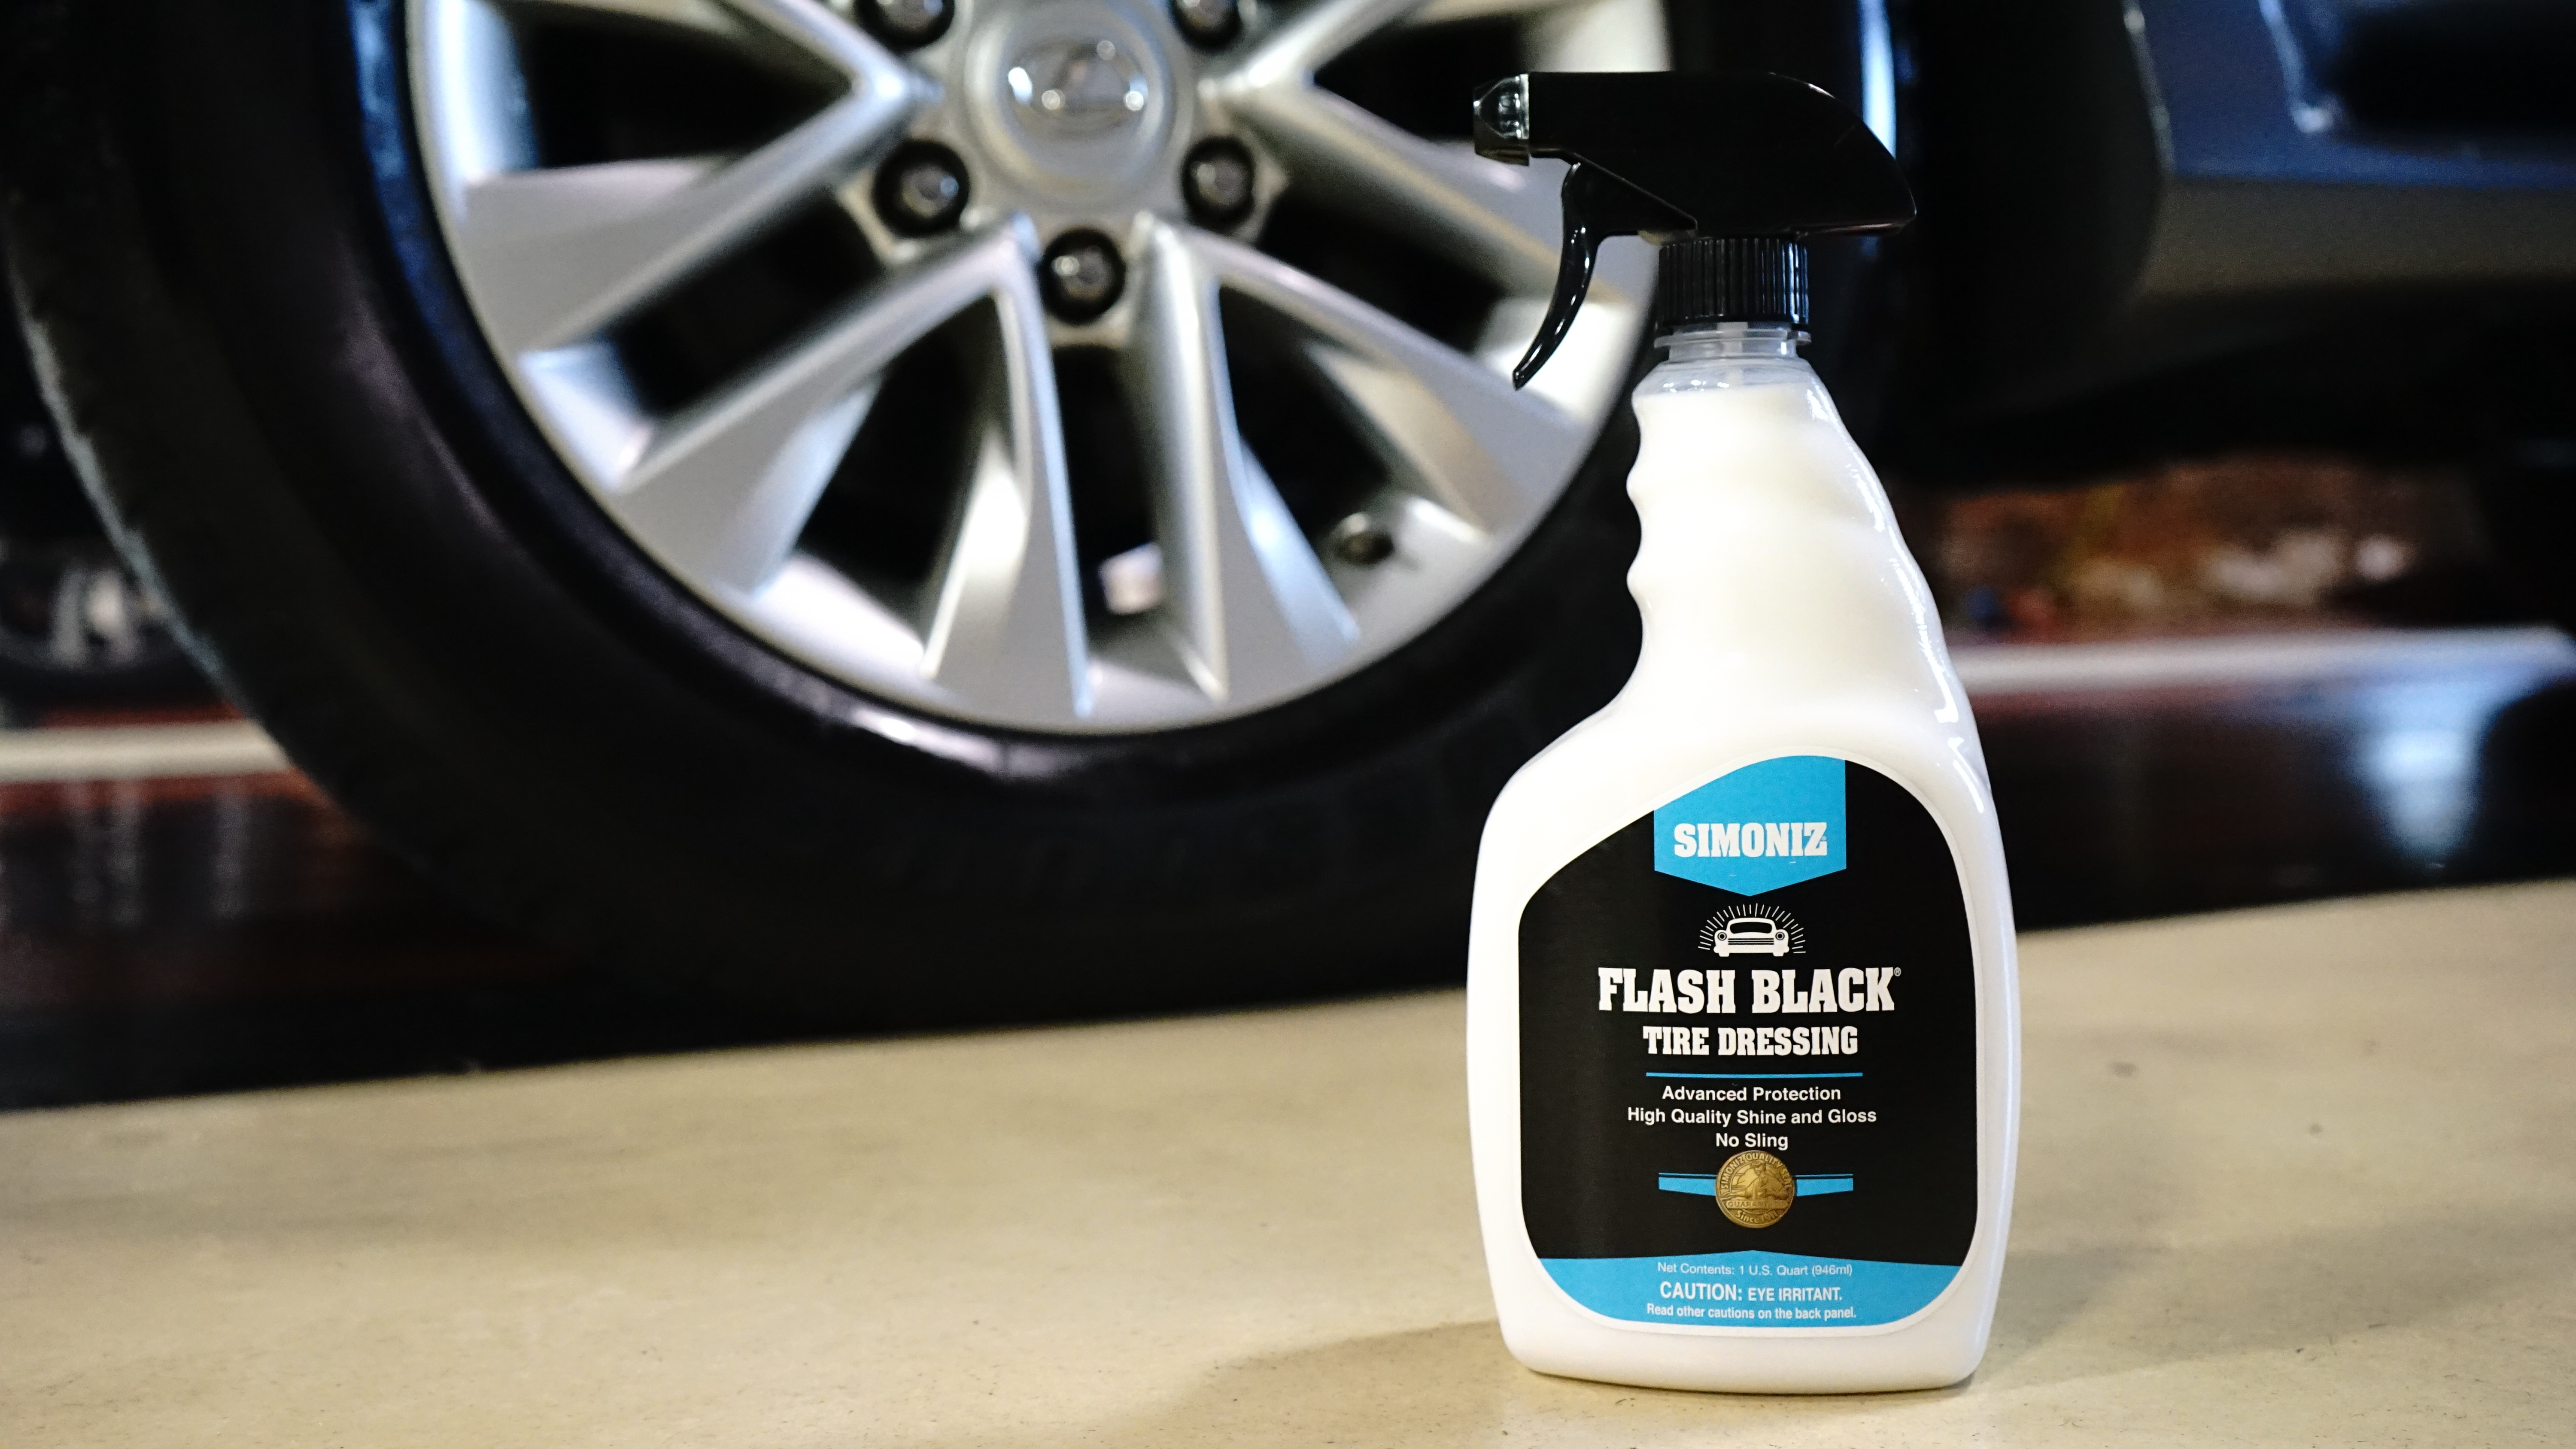 Black Beauty Water Based Tire Shine and Dressing